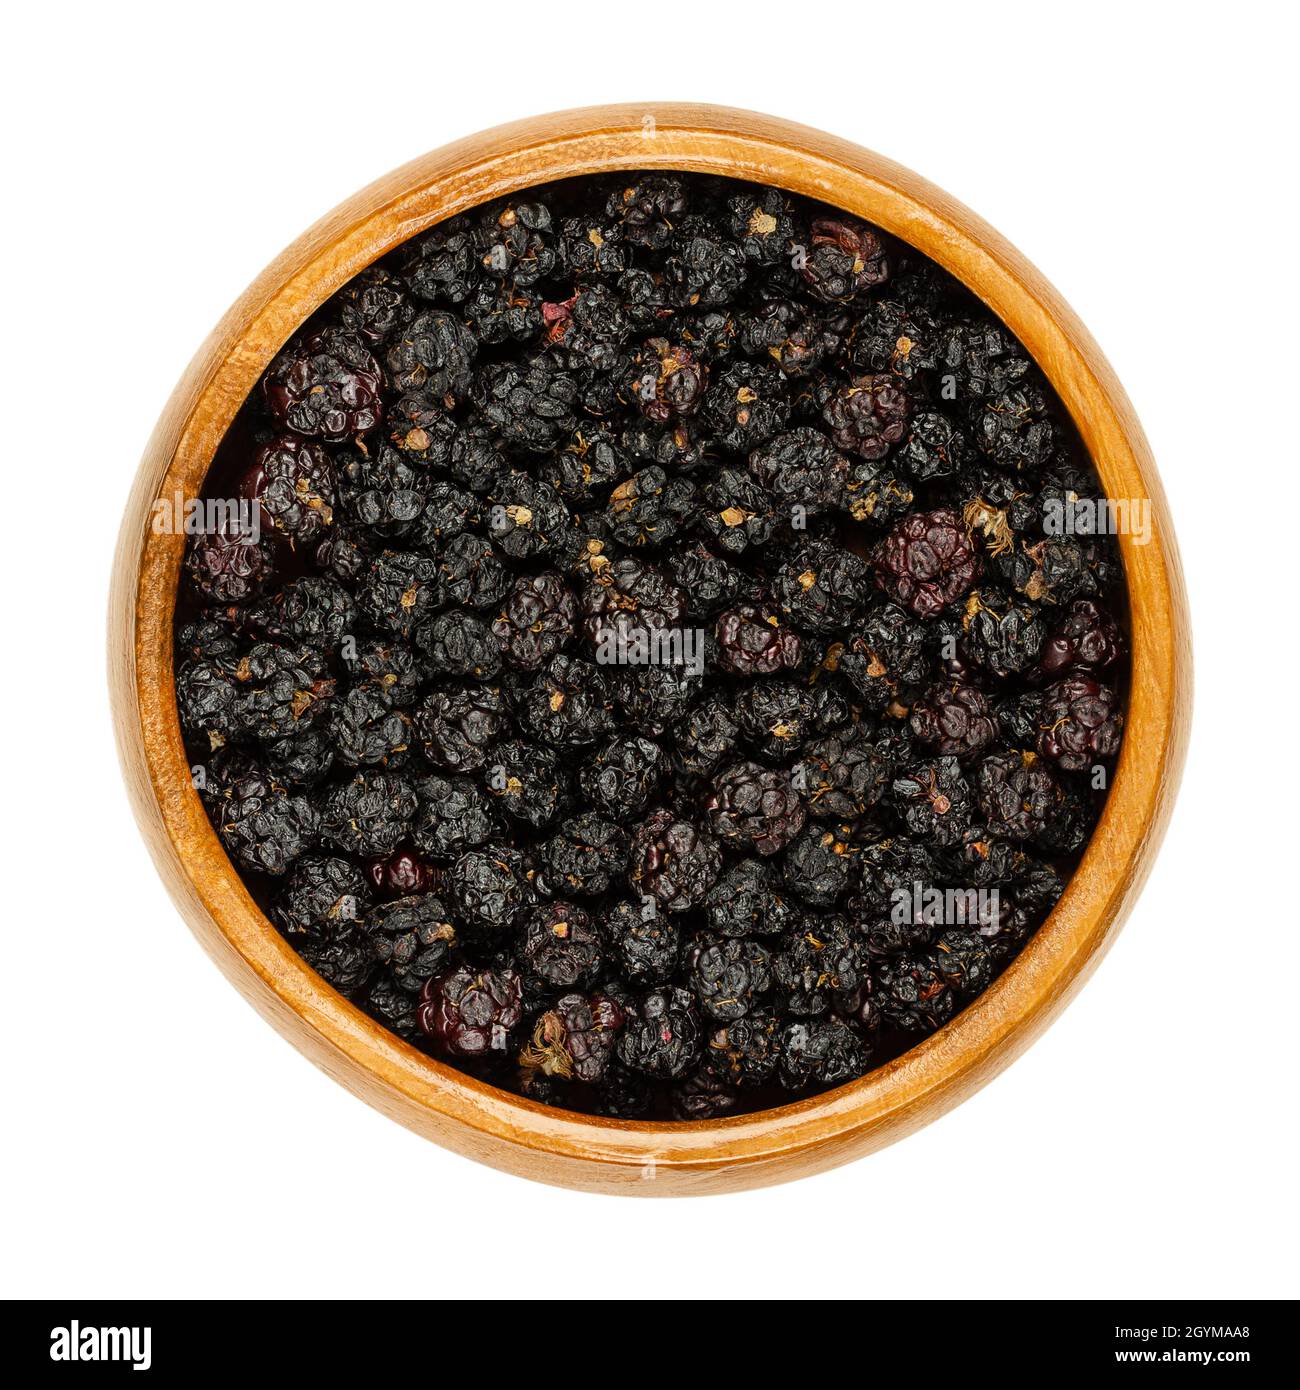 Dried ripe European blackberries in a wooden bowl. Air dried wild brambles, Rubus fruticosus, a sweet fruit, used for tea additive. Stock Photo